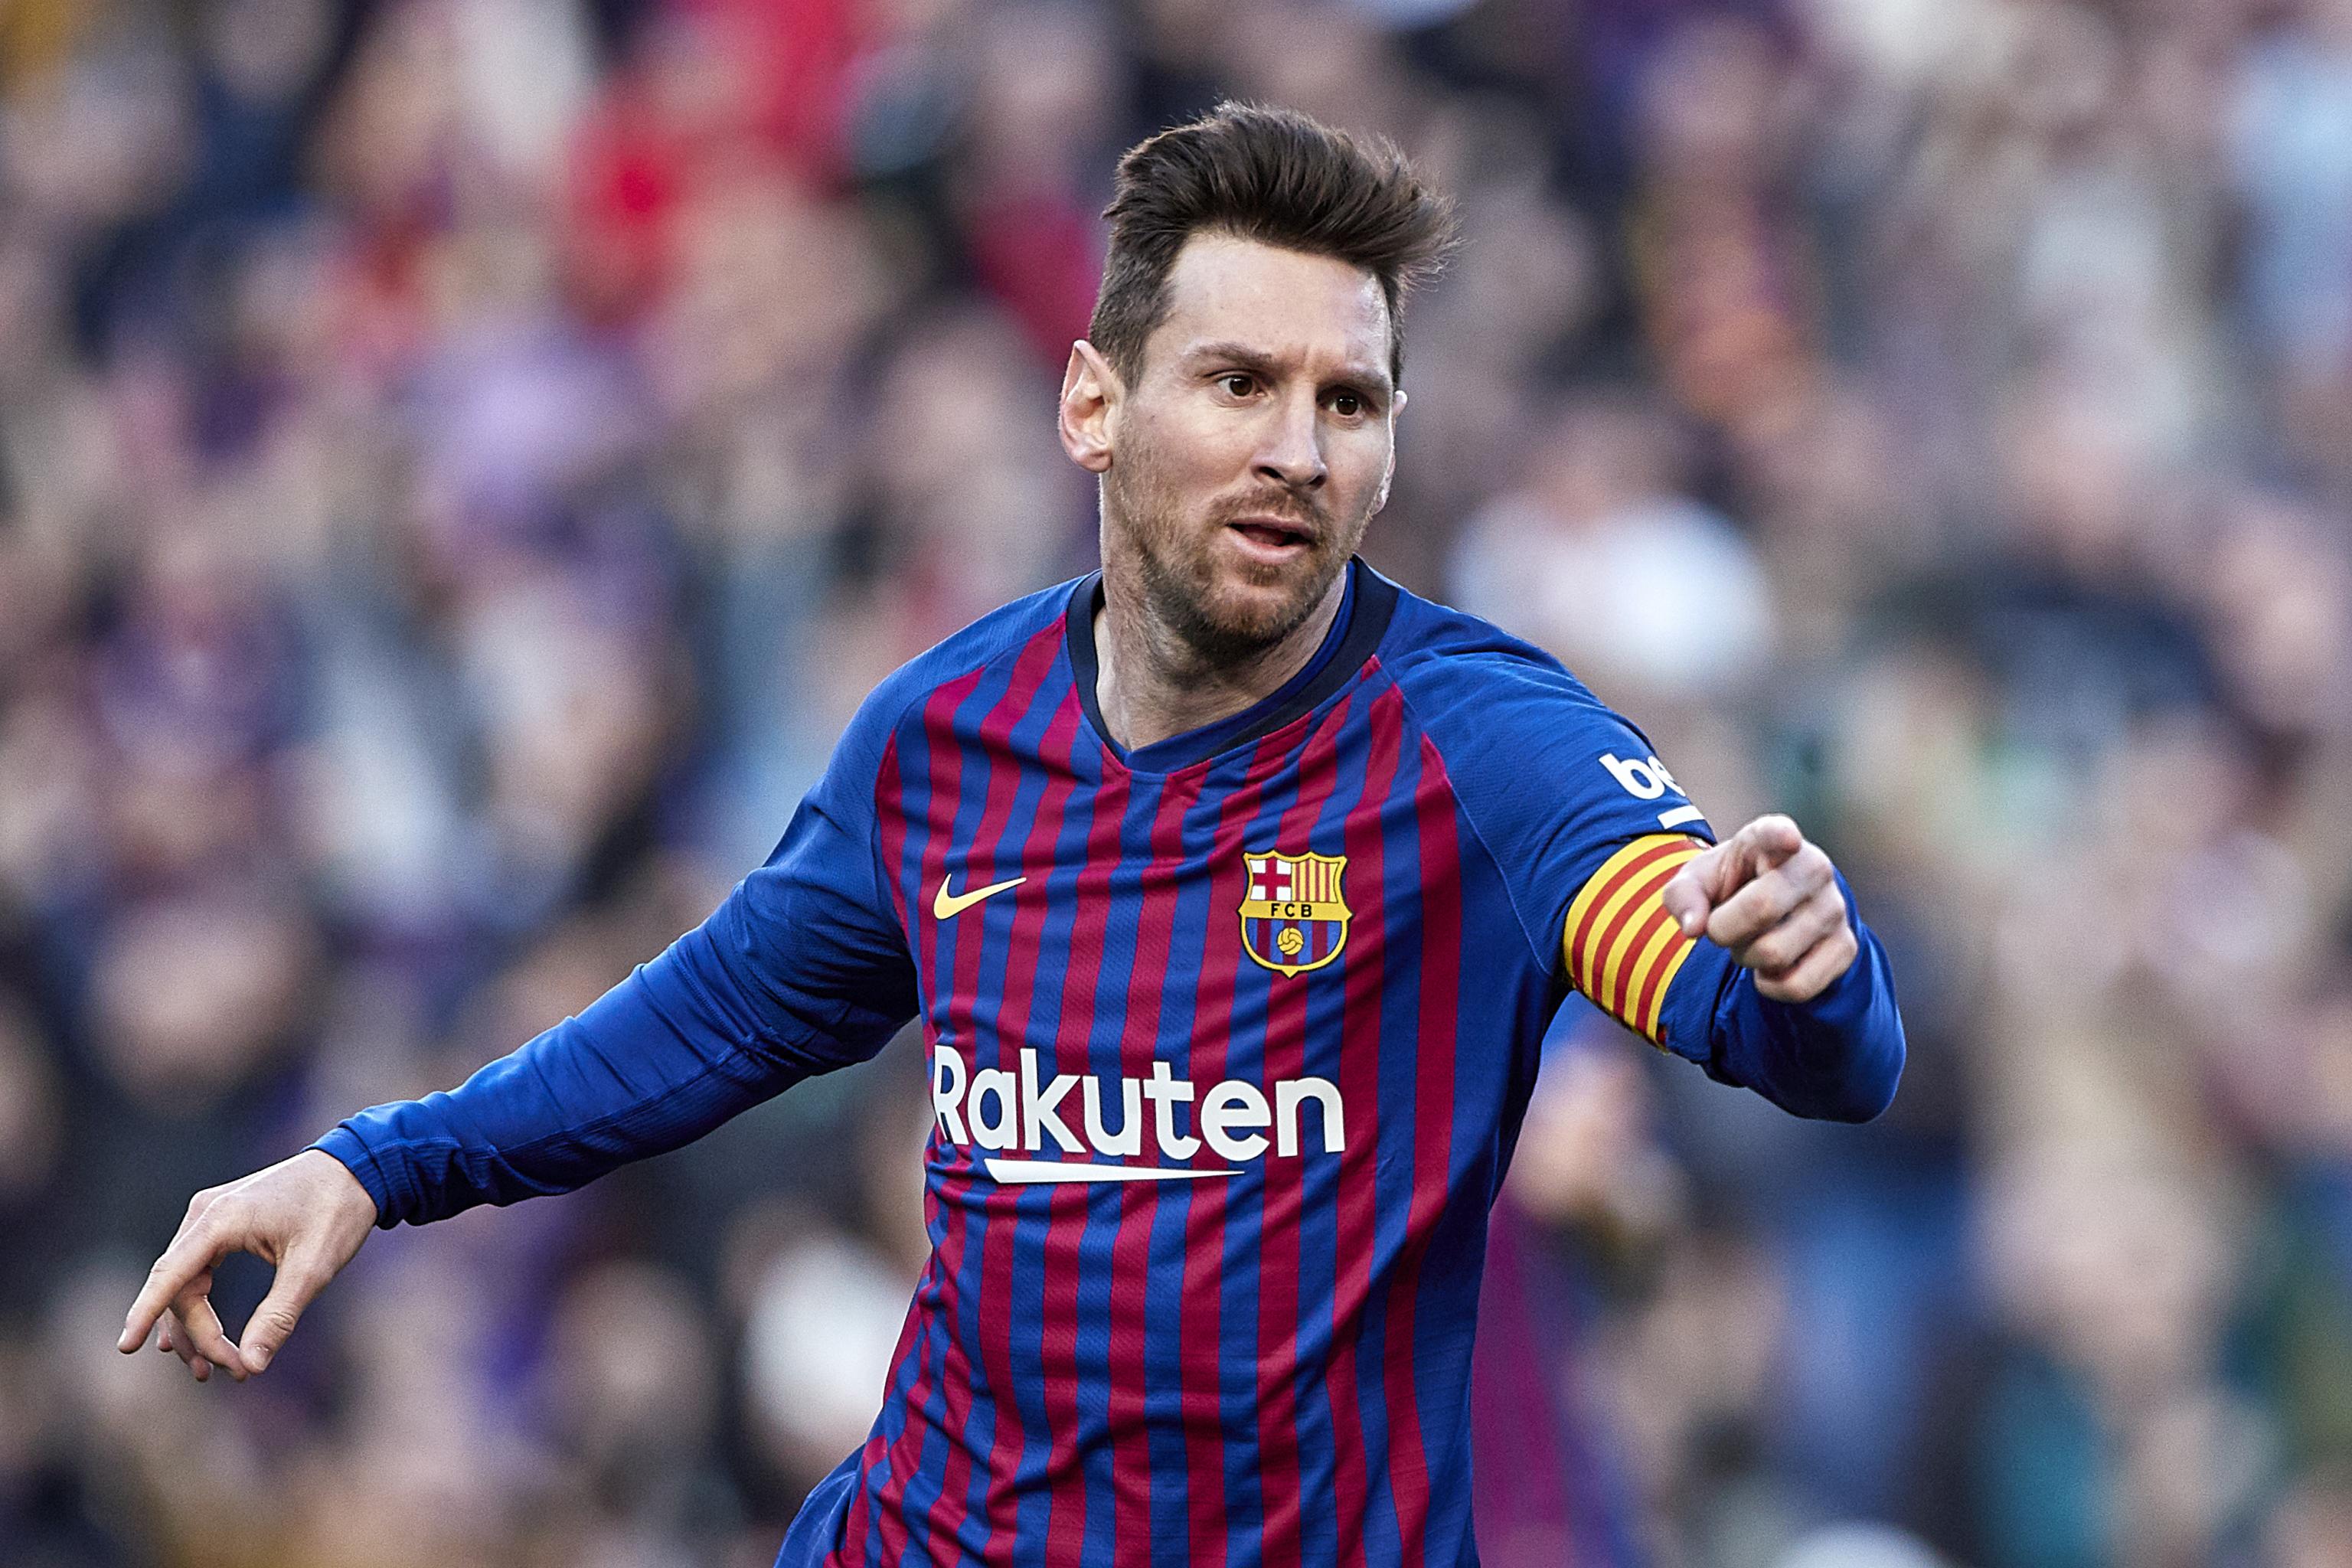 Golden Shoe 18 19 Top Goalscorers In Europe Updated Points Table On April 1 Bleacher Report Latest News Videos And Highlights